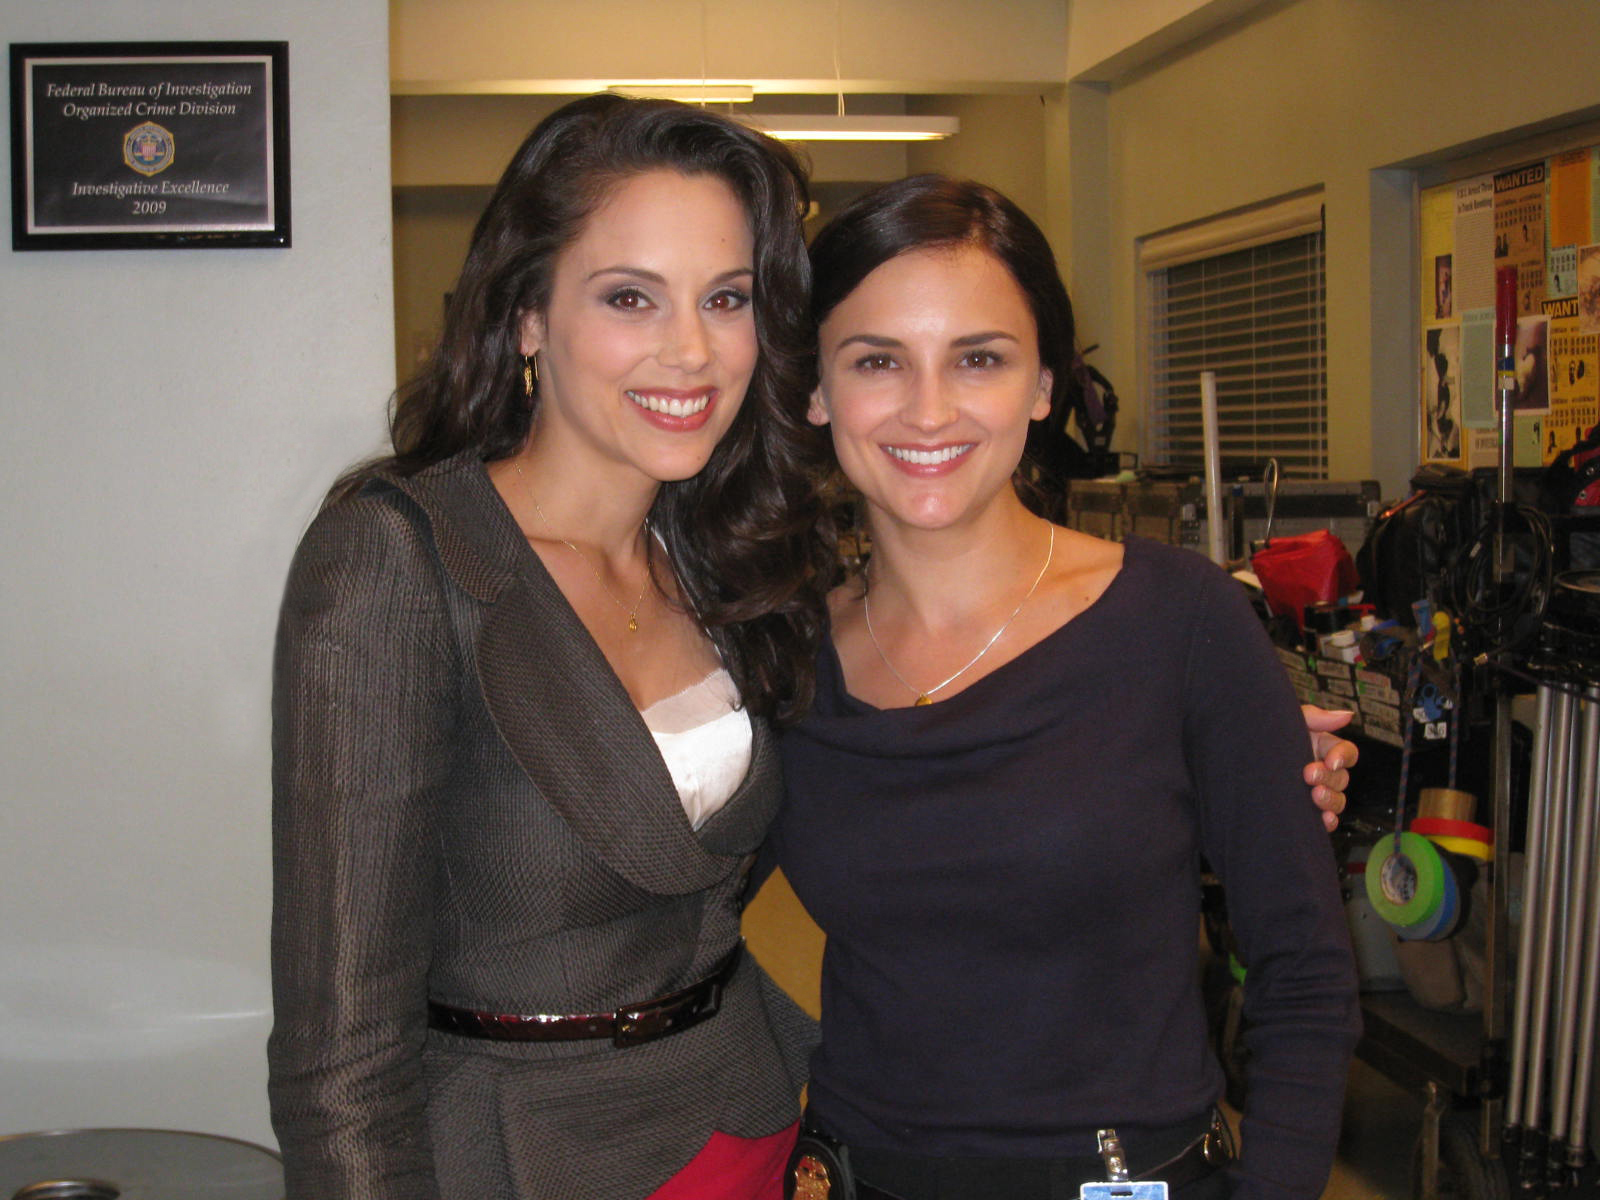 Tessa Munro and Rachael Leigh Cook on the set of 